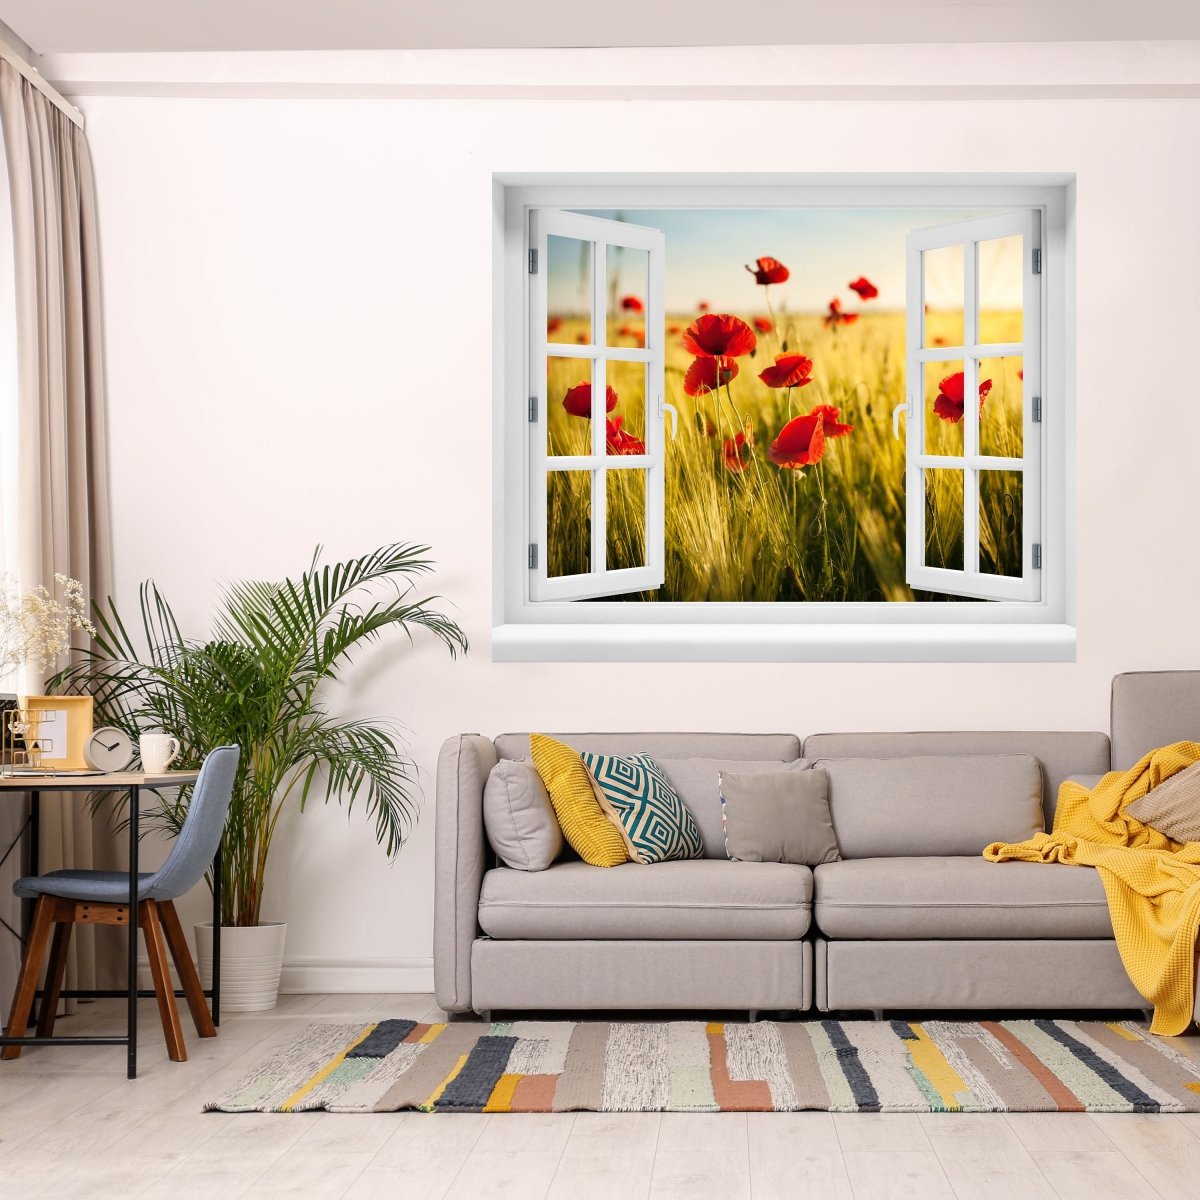 Cornfield with poppies 3D wall sticker - Wall decal M0398